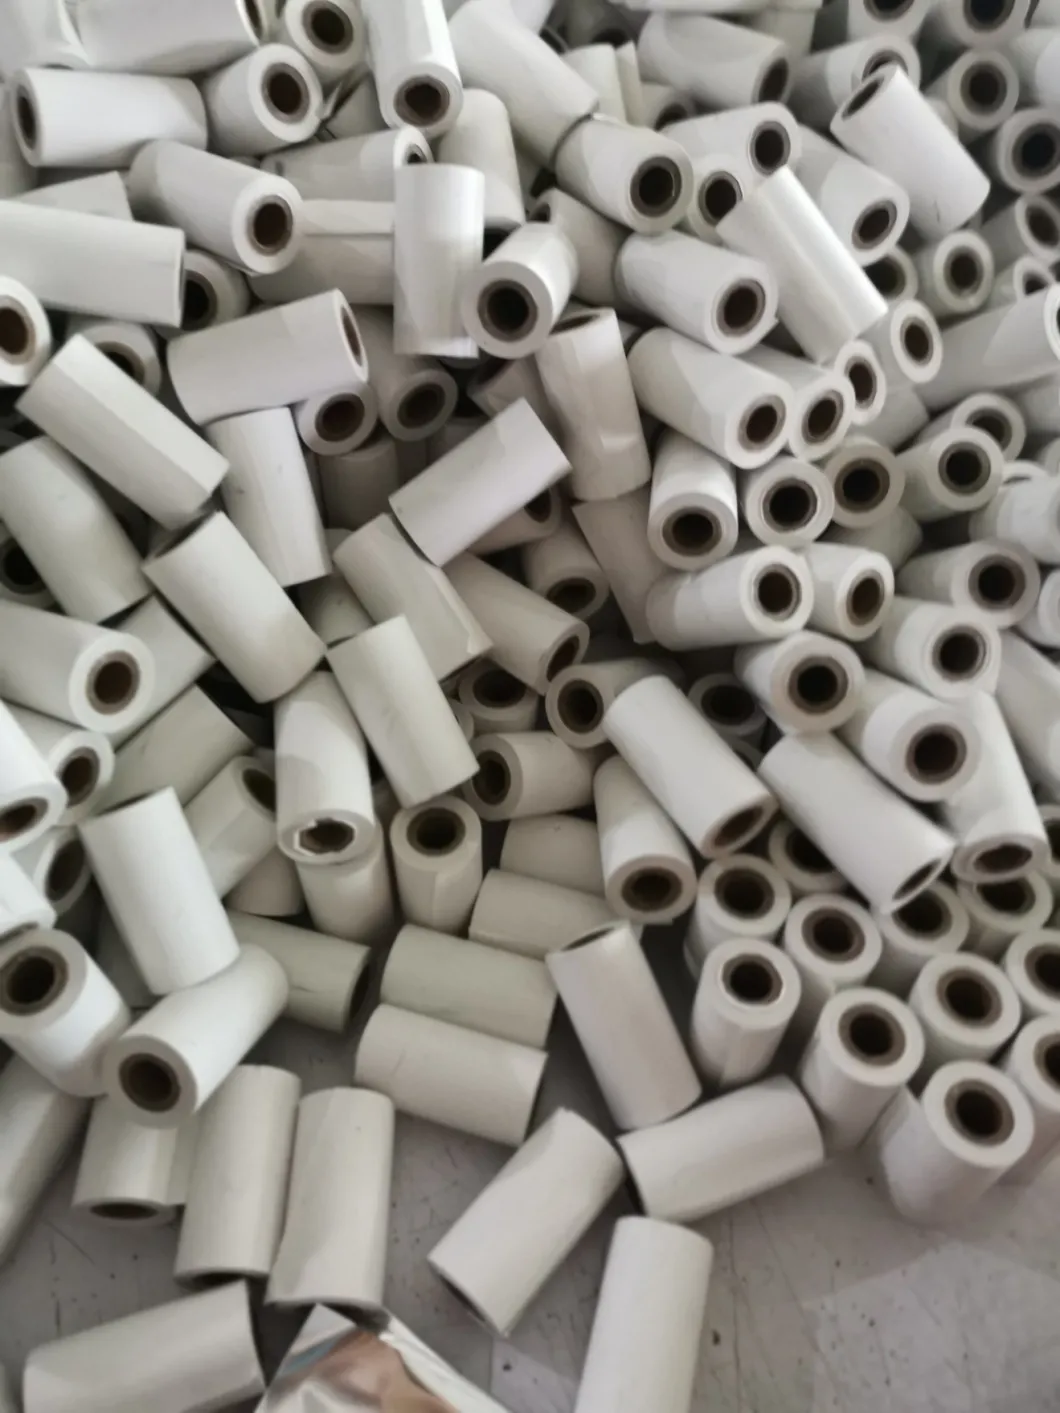 Green Woods Thermal Paper Factory Top Quality